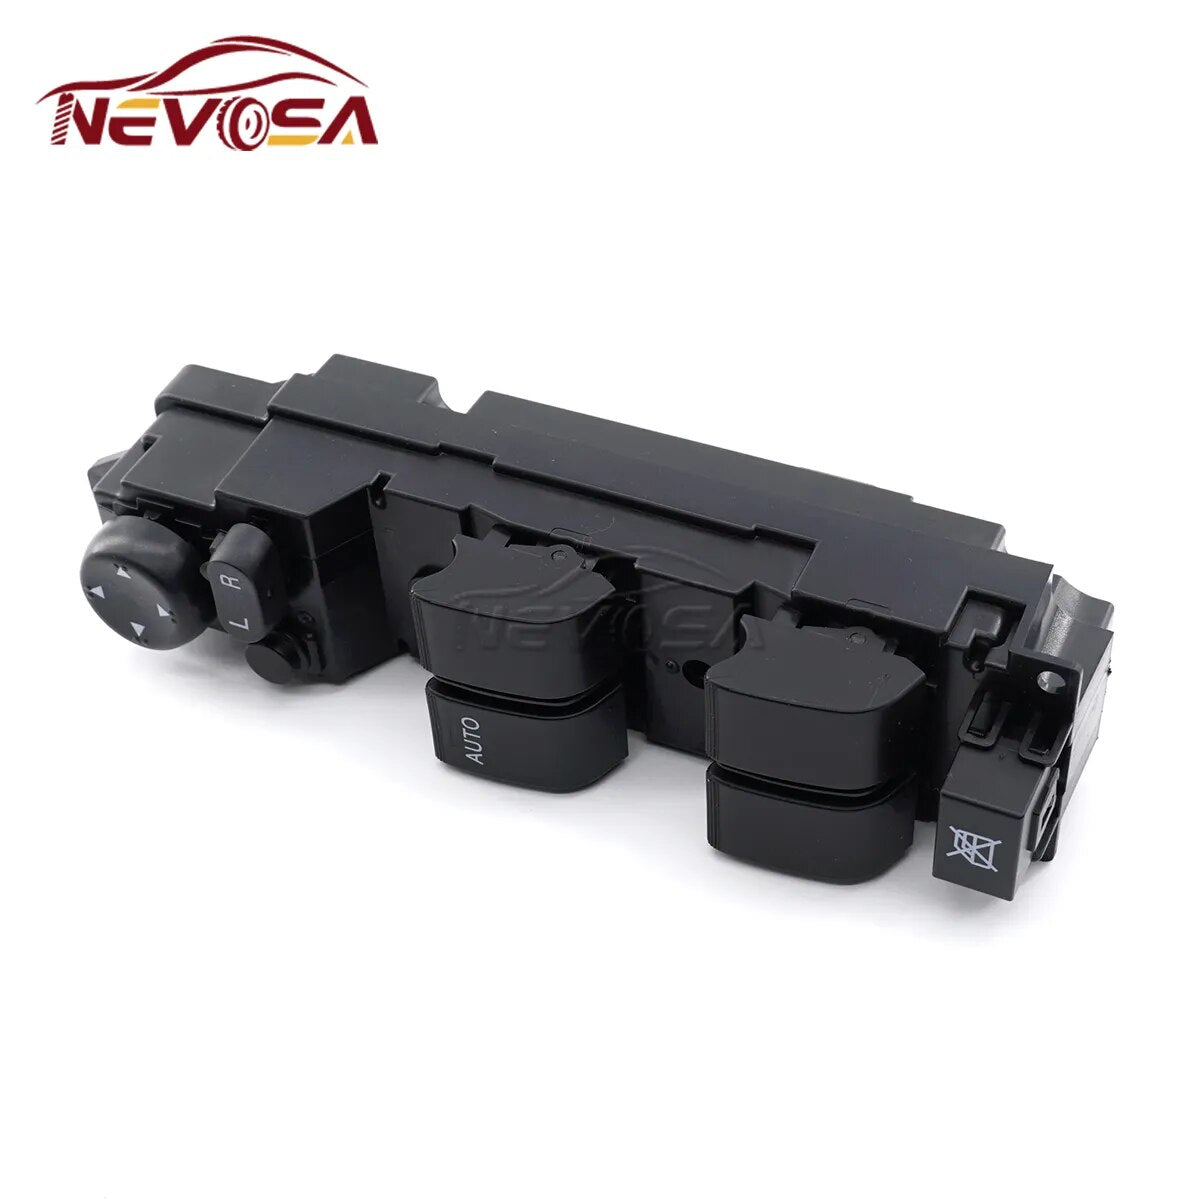 NEVOSA For Mazda 2 M2 2007-2013 Window Switch Control Glass Lifter Regulator Button Front Left Driver Door DF73-66-350B